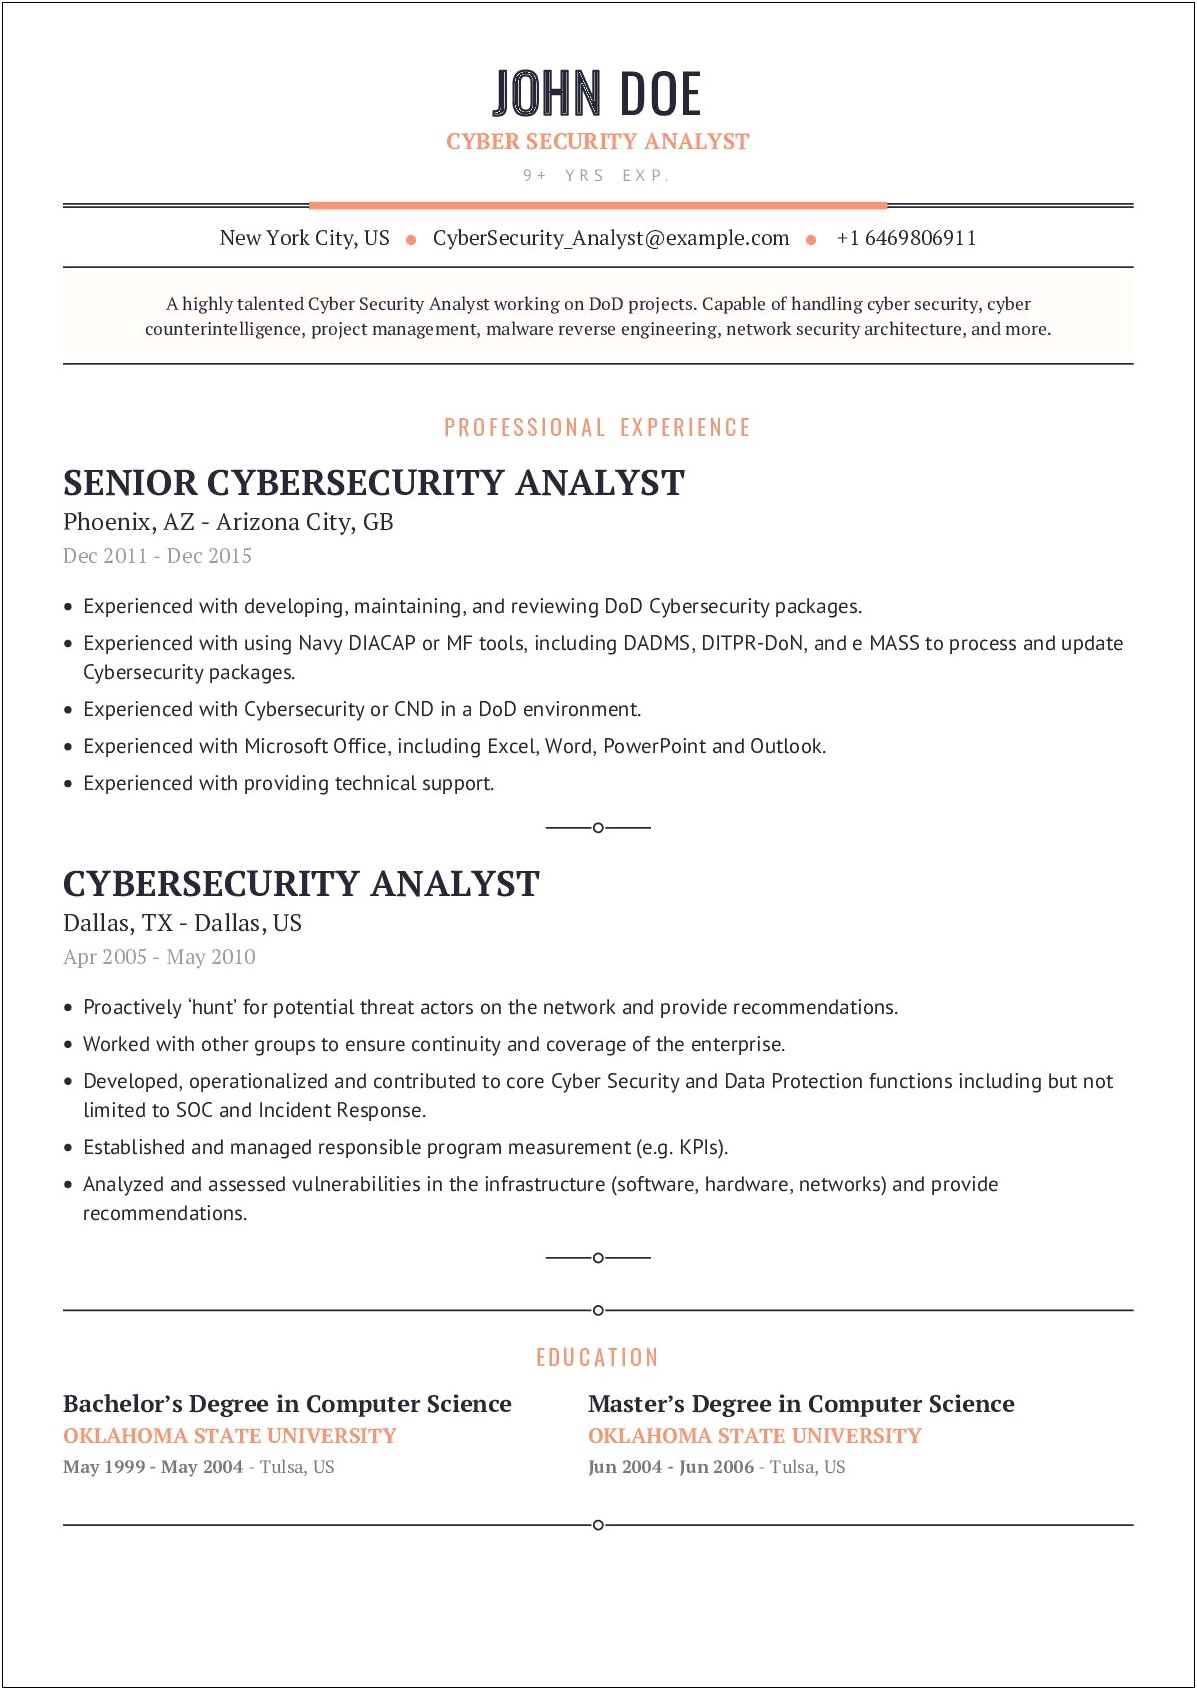 Sample Of Security Analyst Resume